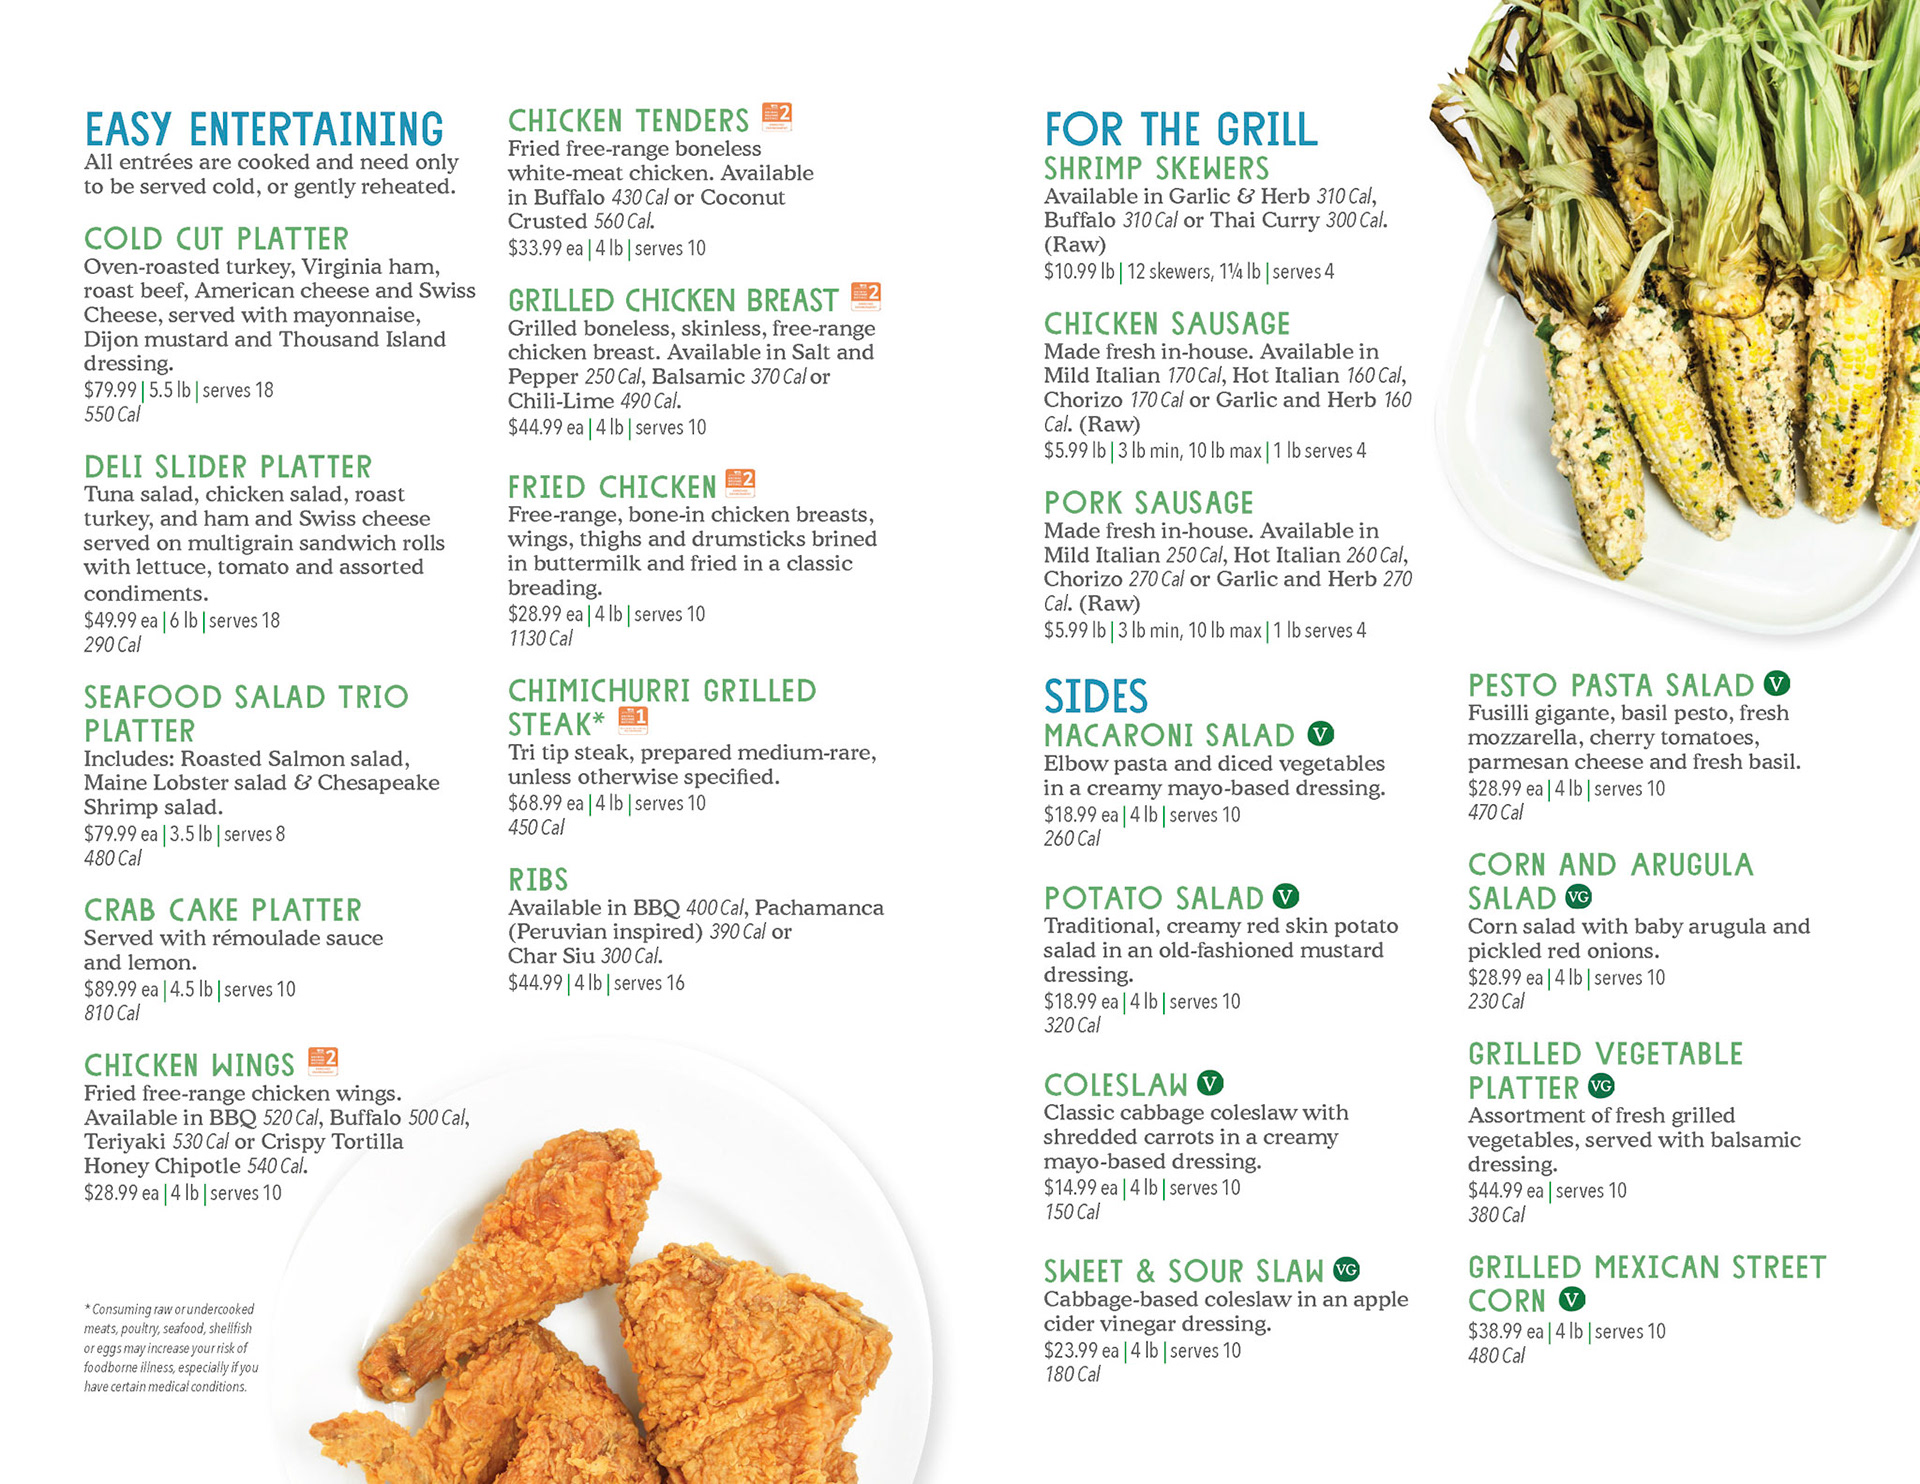 CATERING MENU - Whole Foods Market